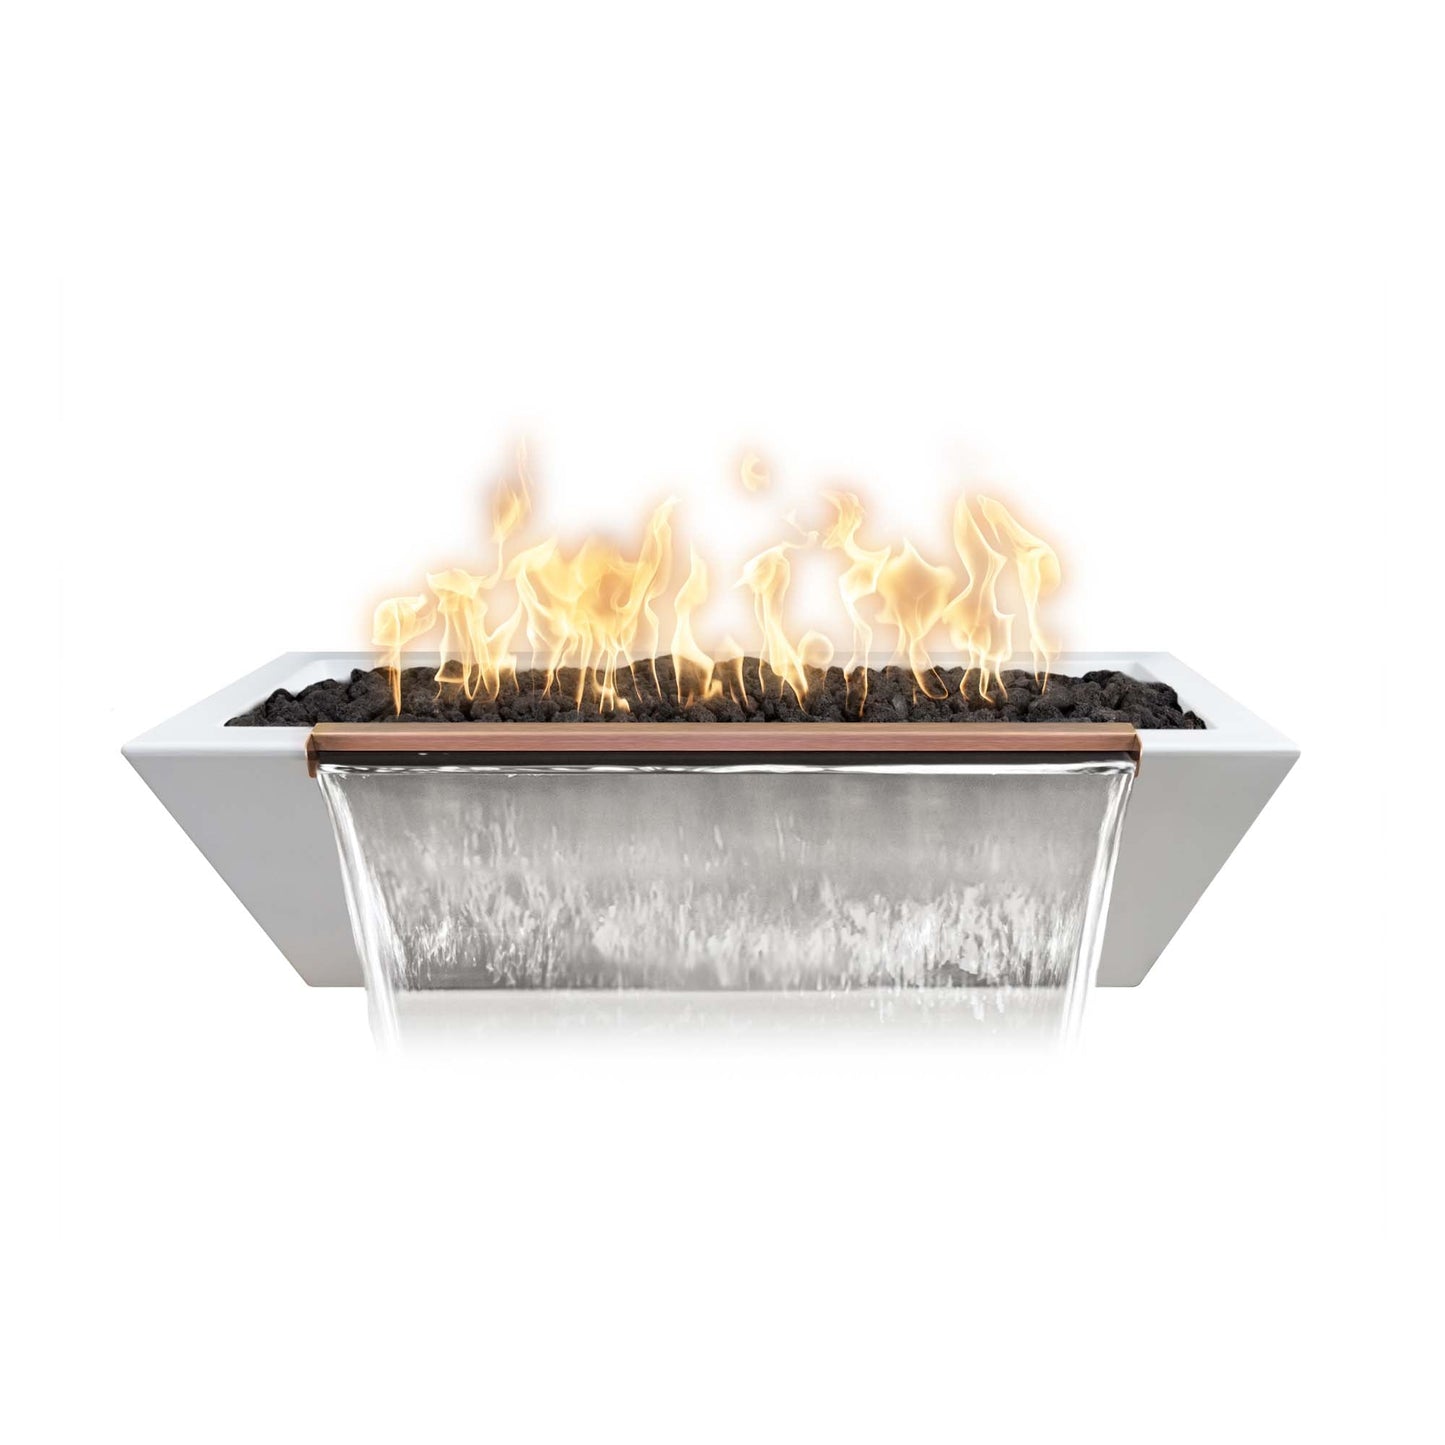 The Outdoor Plus Linear Maya 60" Metallic Bronze GFRC Concrete Natural Gas Fire & Water Bowl with Match Lit Ignition